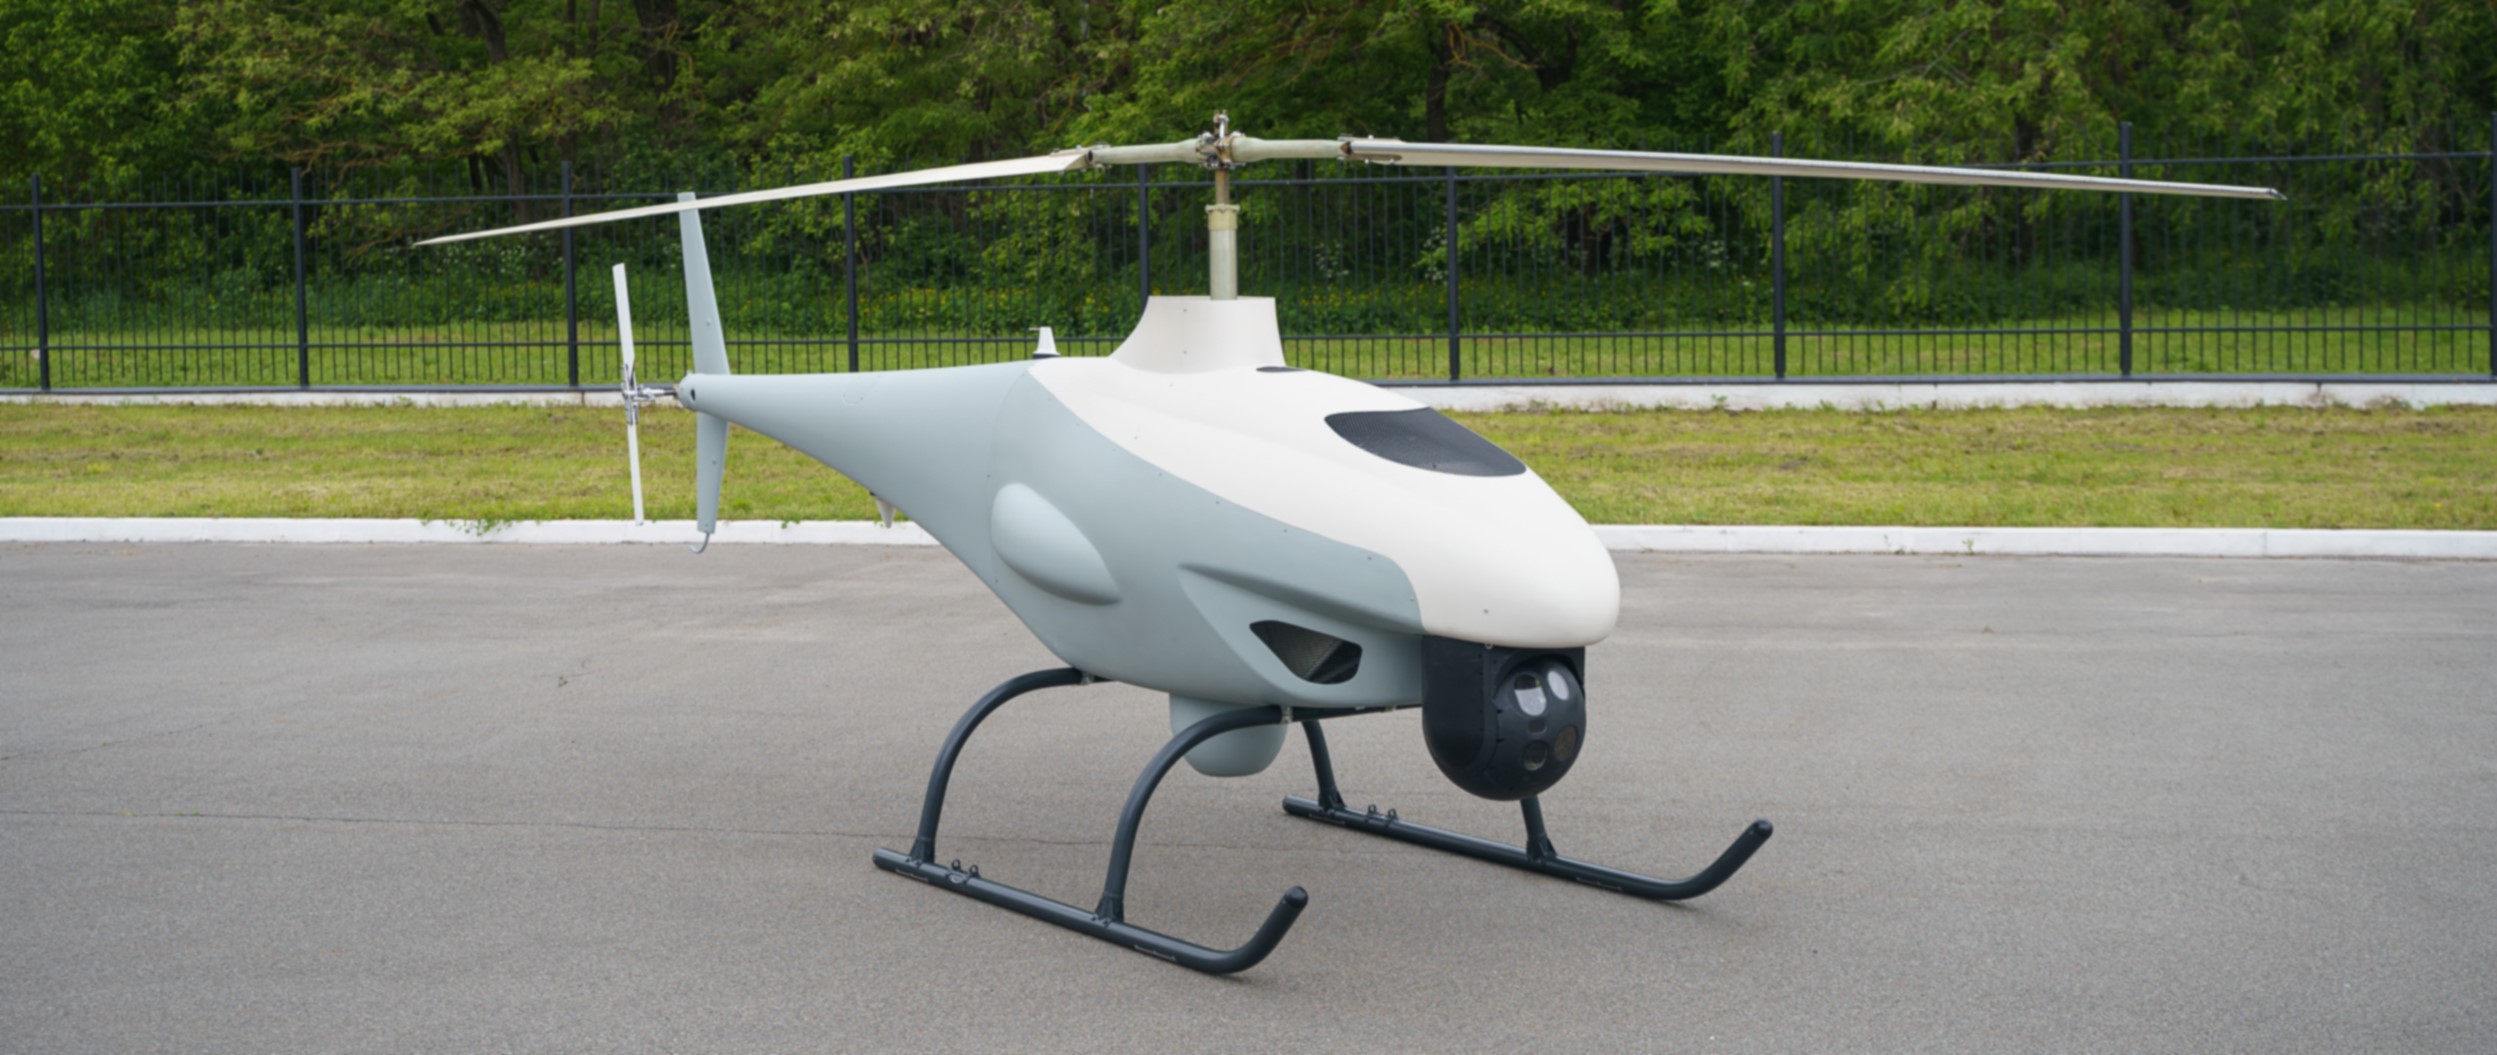 Ramzay's RZ-500 helicopter drone